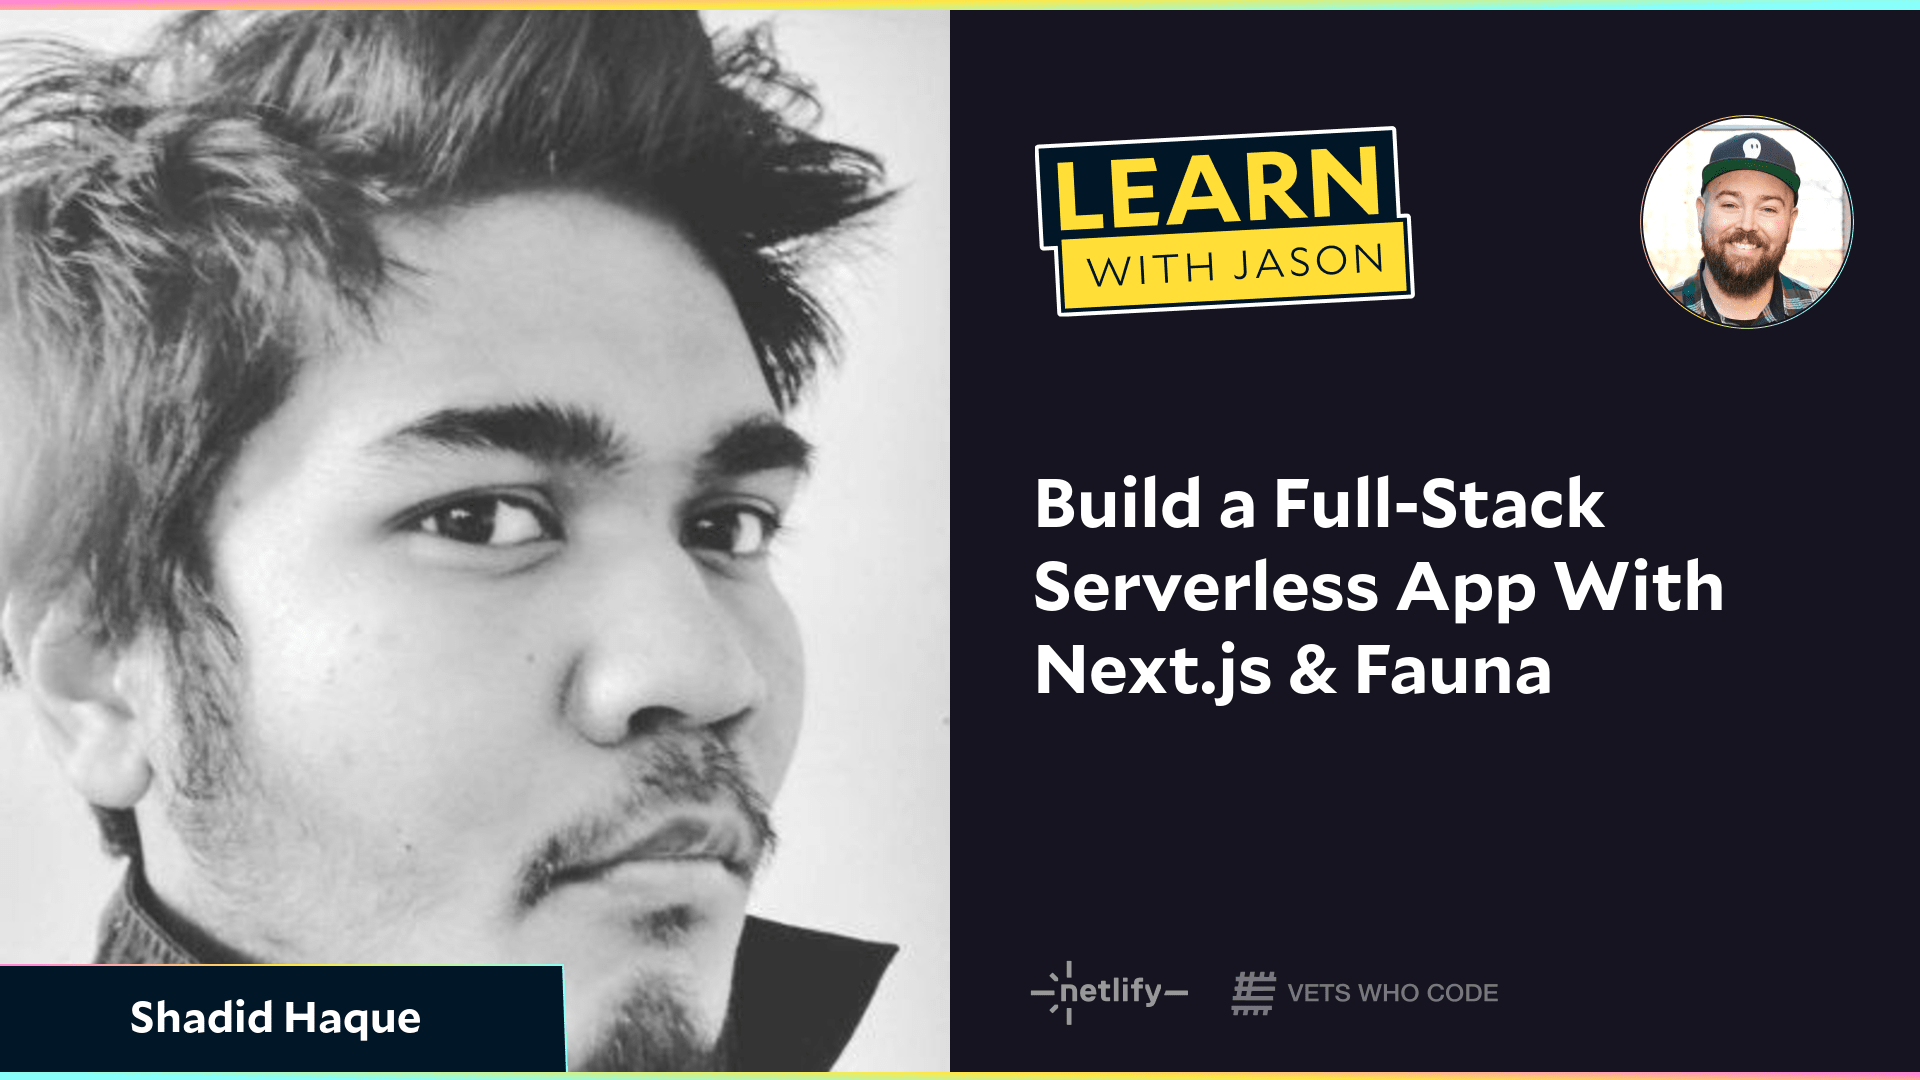 Build a Full-Stack Serverless App With Next.js & Fauna (with Shadid Haque)